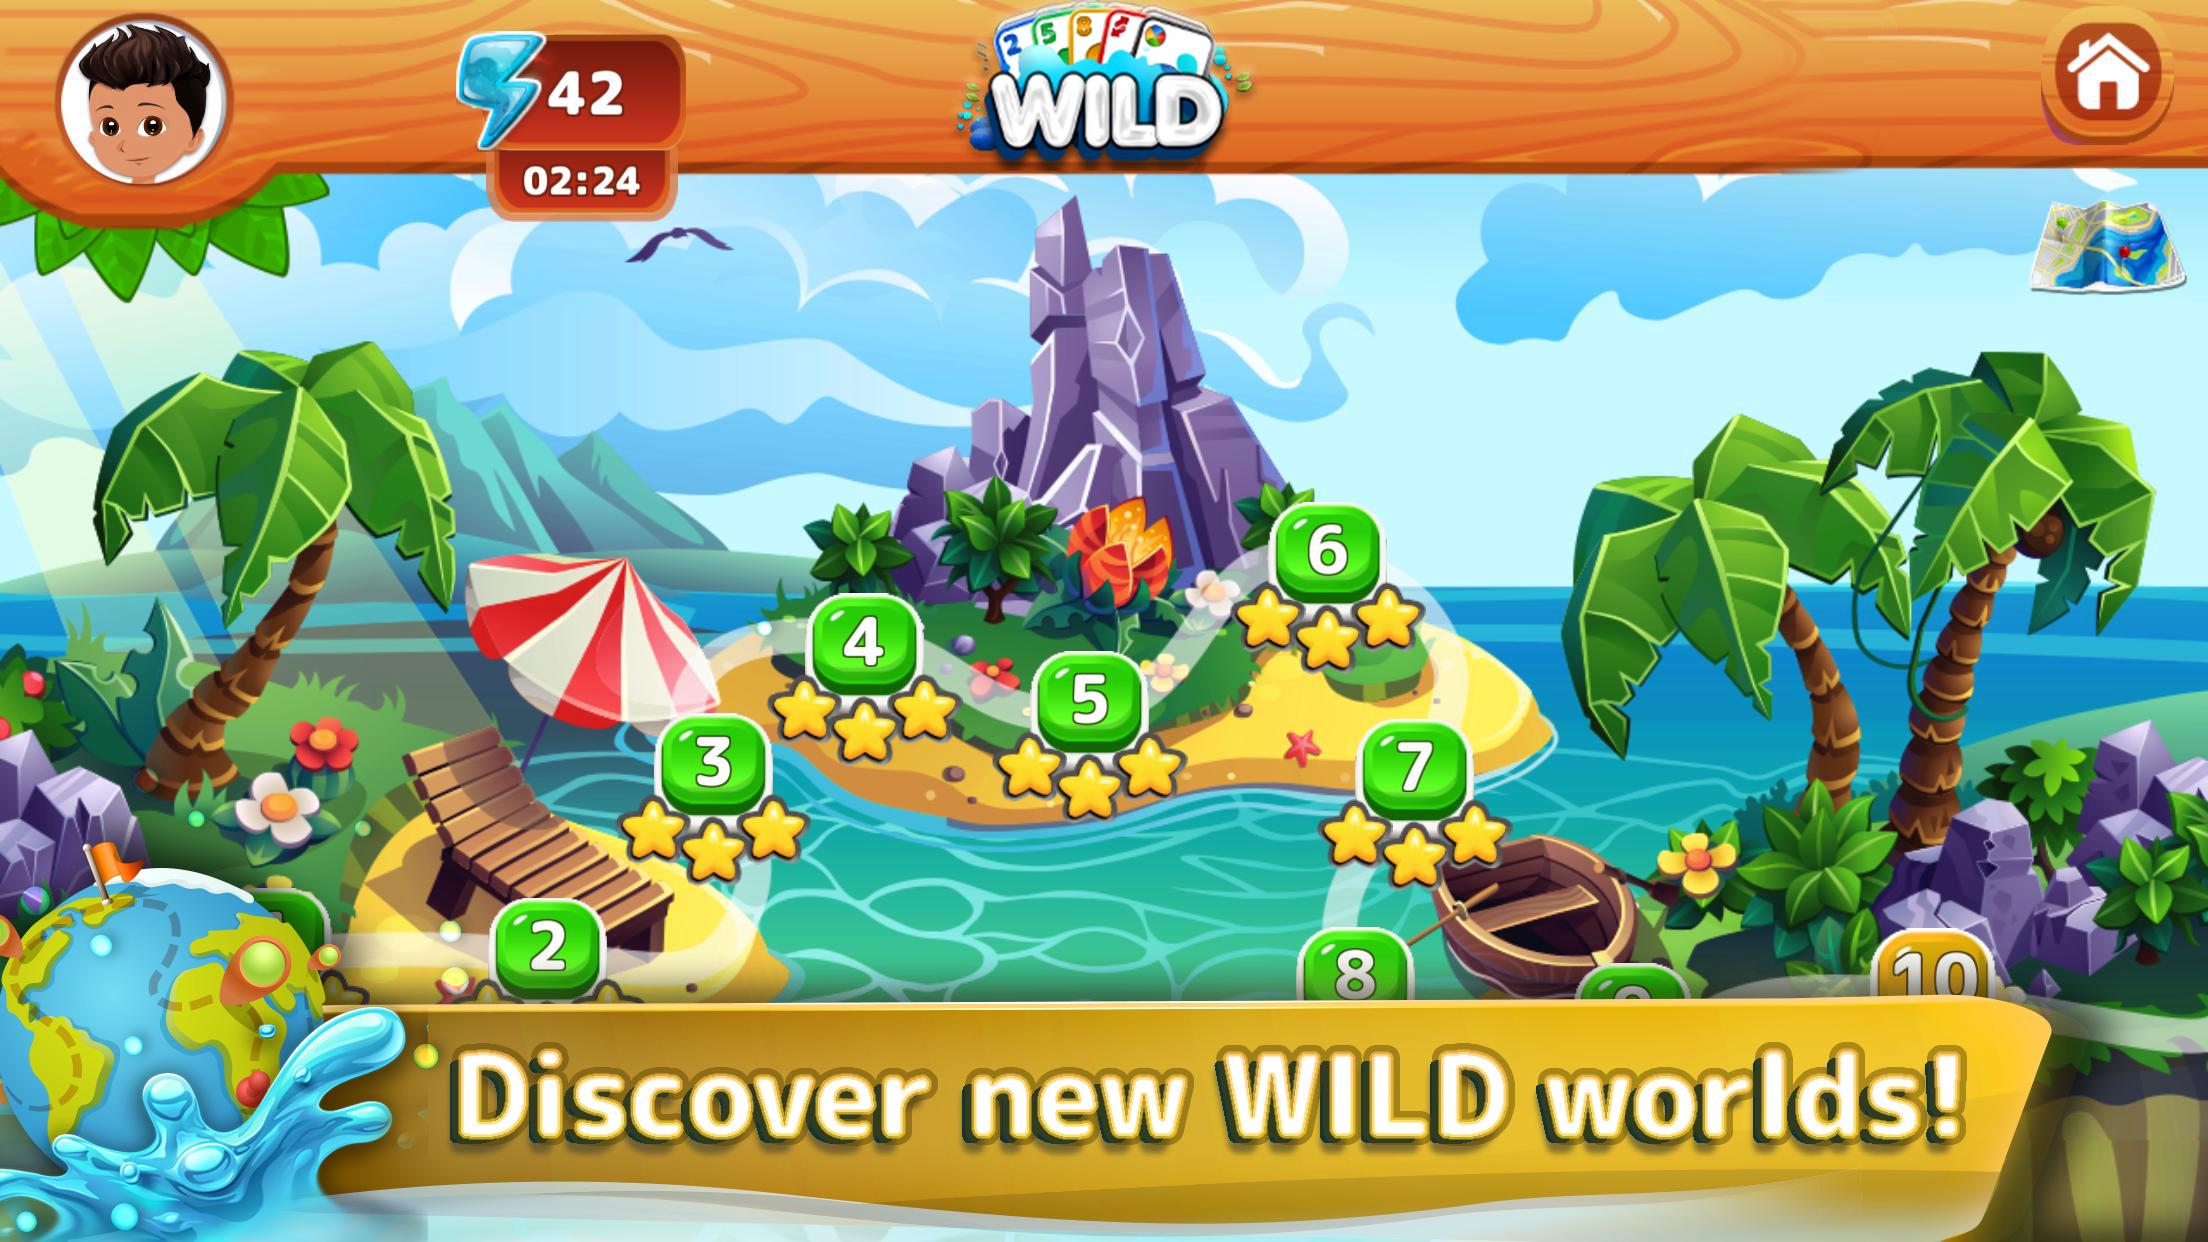 WILD CARDS Online: Multiplayer Games with Friends 3.0.22 Screenshot 3